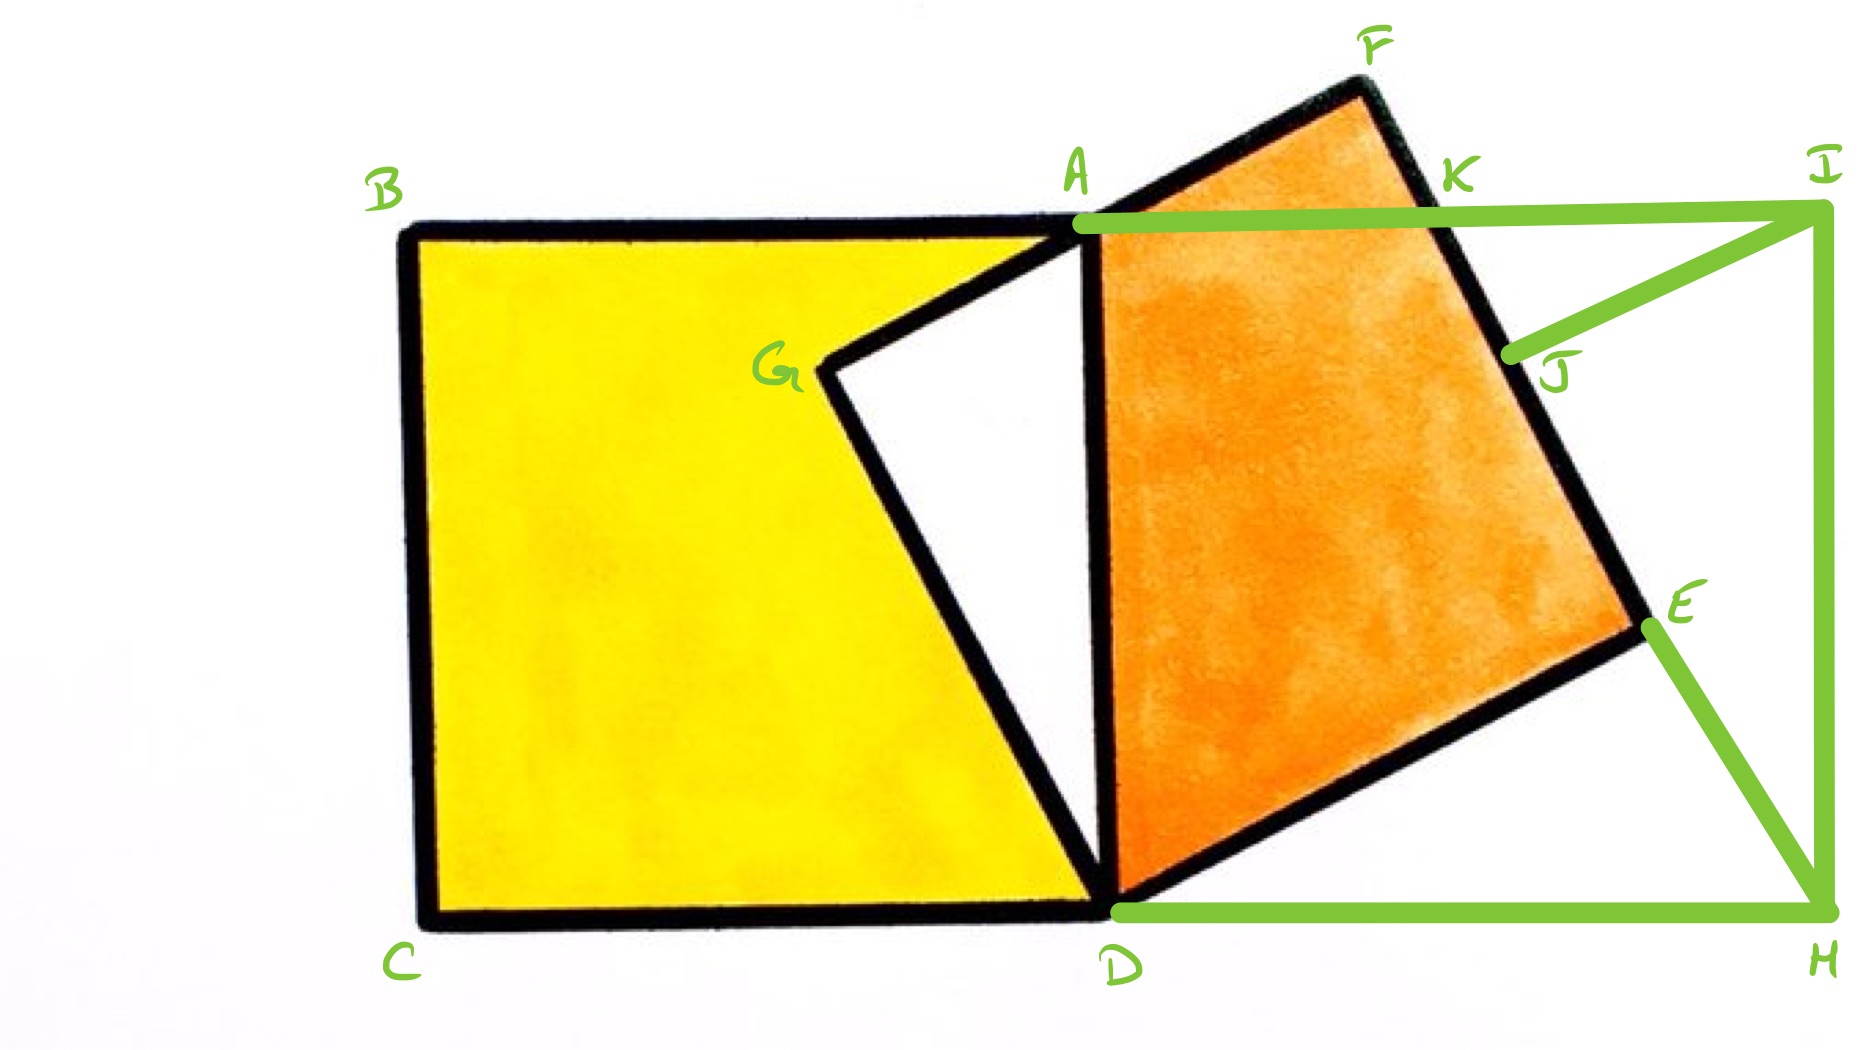 Two overlapping squares II labelled